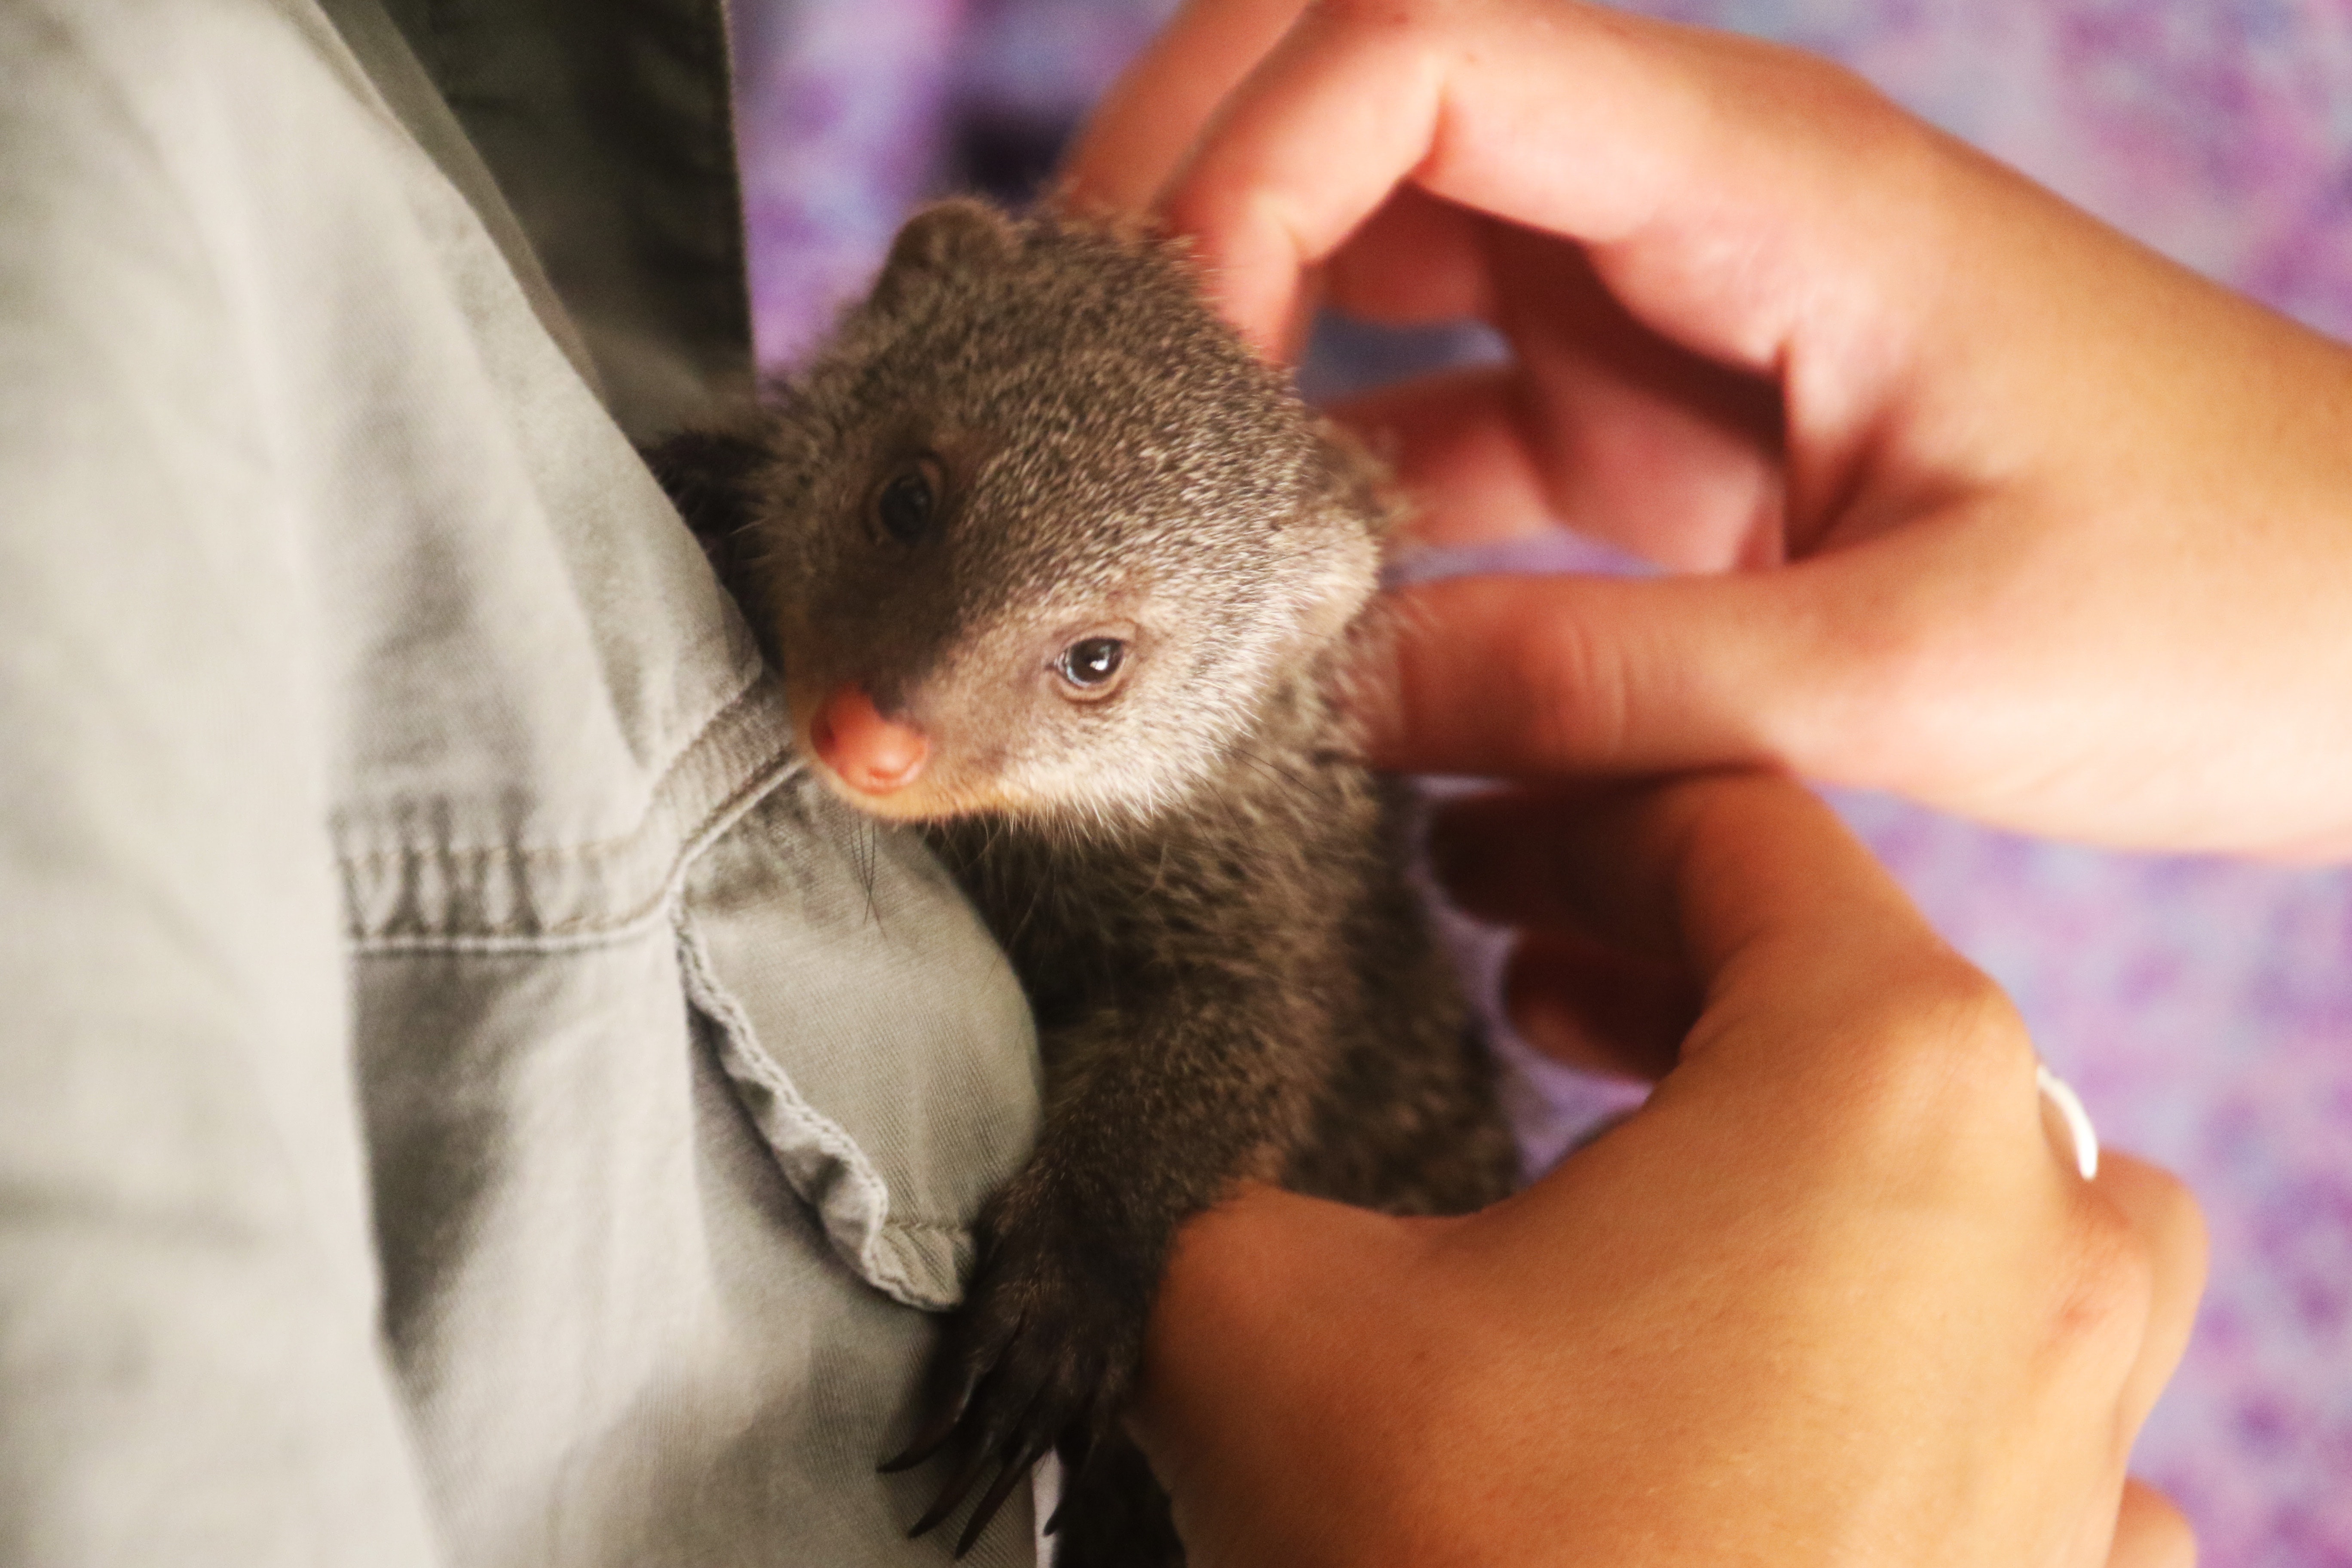 Person Holding Galago